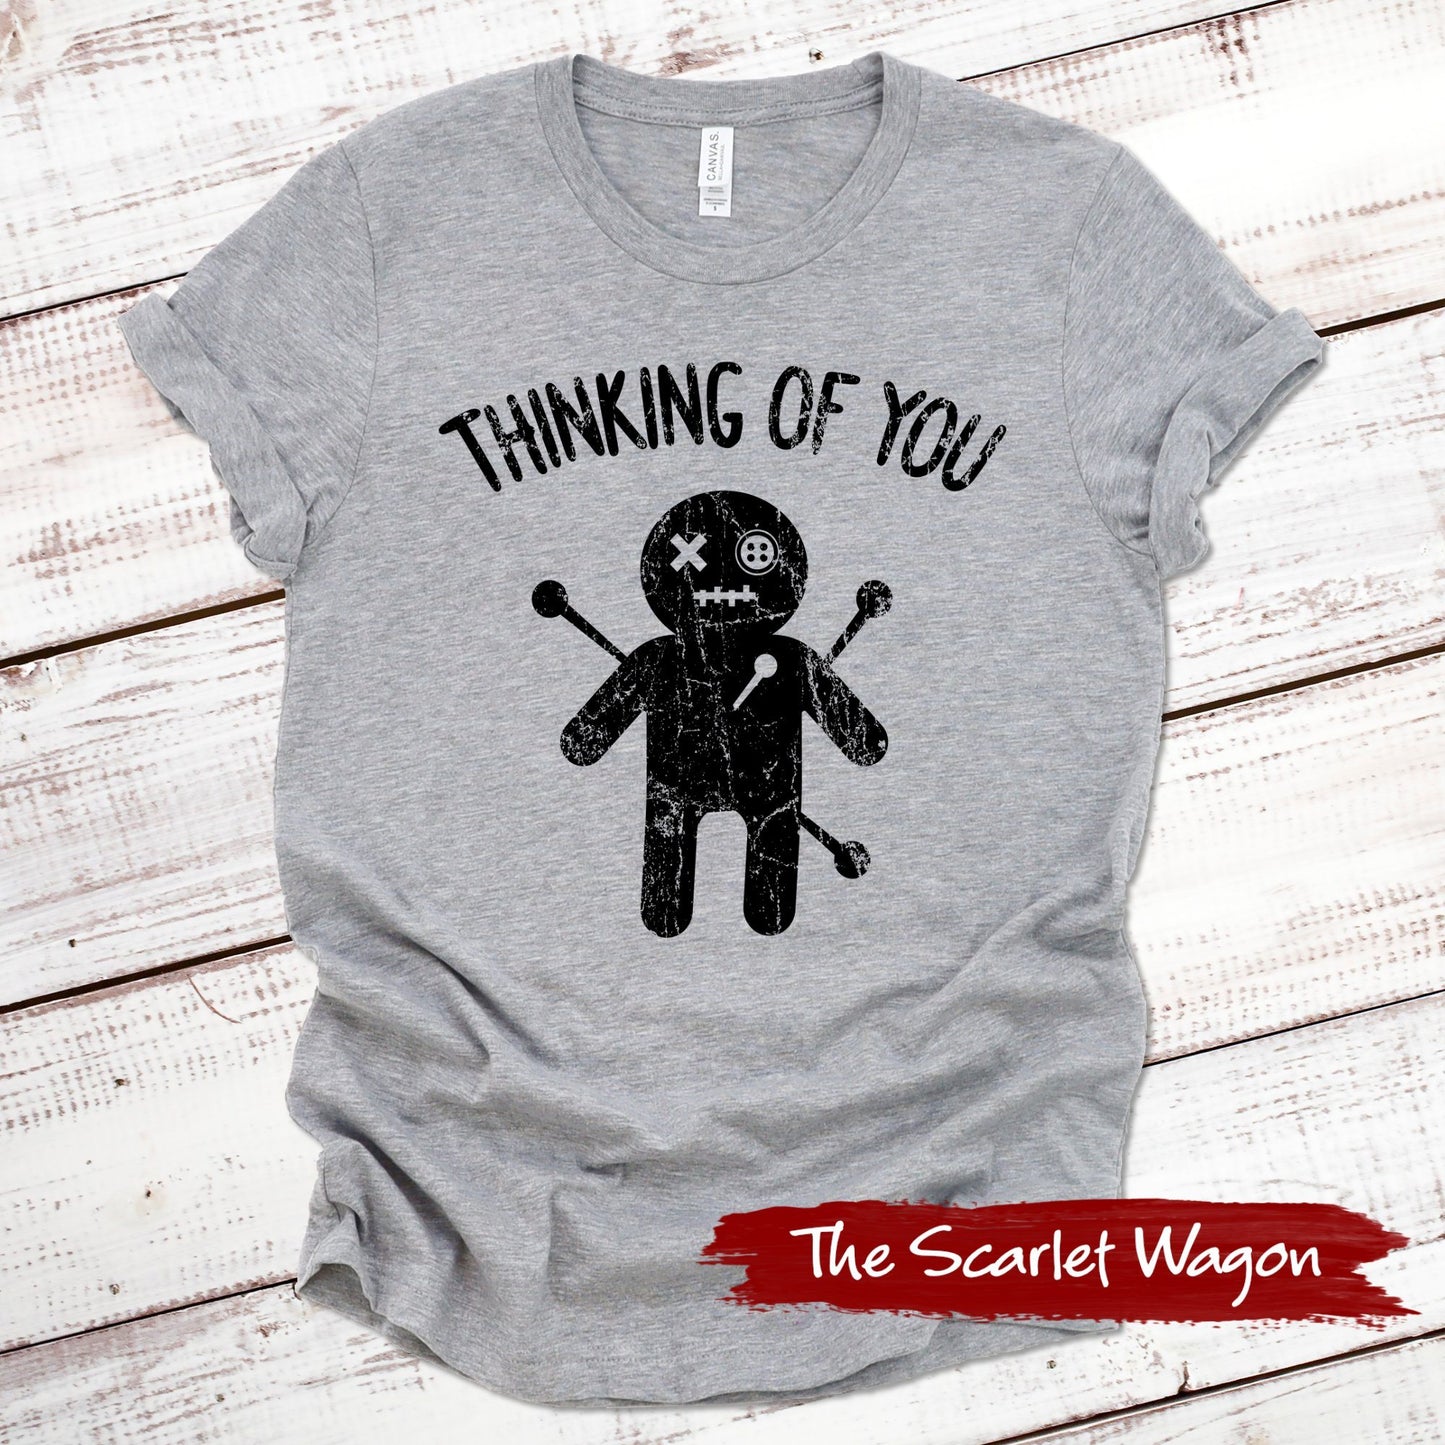 Voodoo Doll Thinking of You Halloween Shirt Scarlet Wagon Athletic Heather XS 